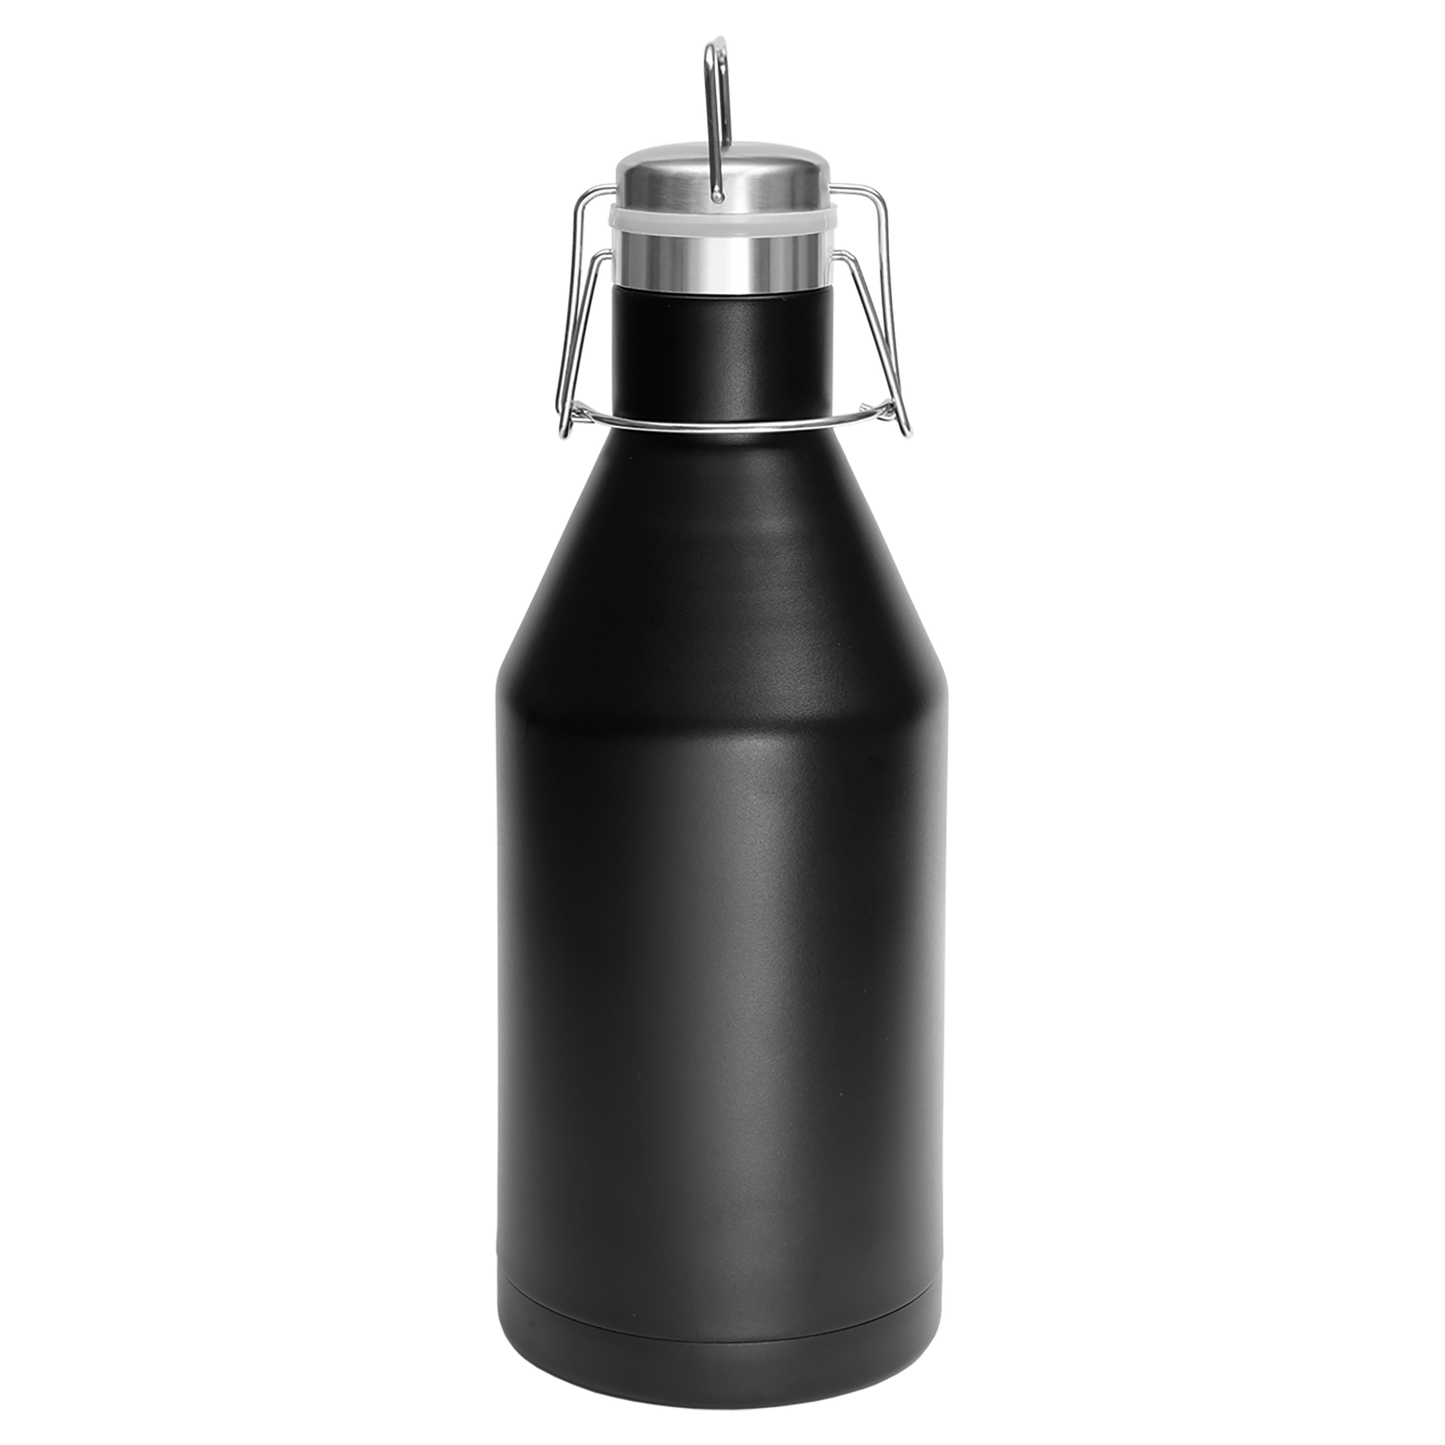 64 oz. Black Vacuum Insulated Growler with Swing-Top Lid